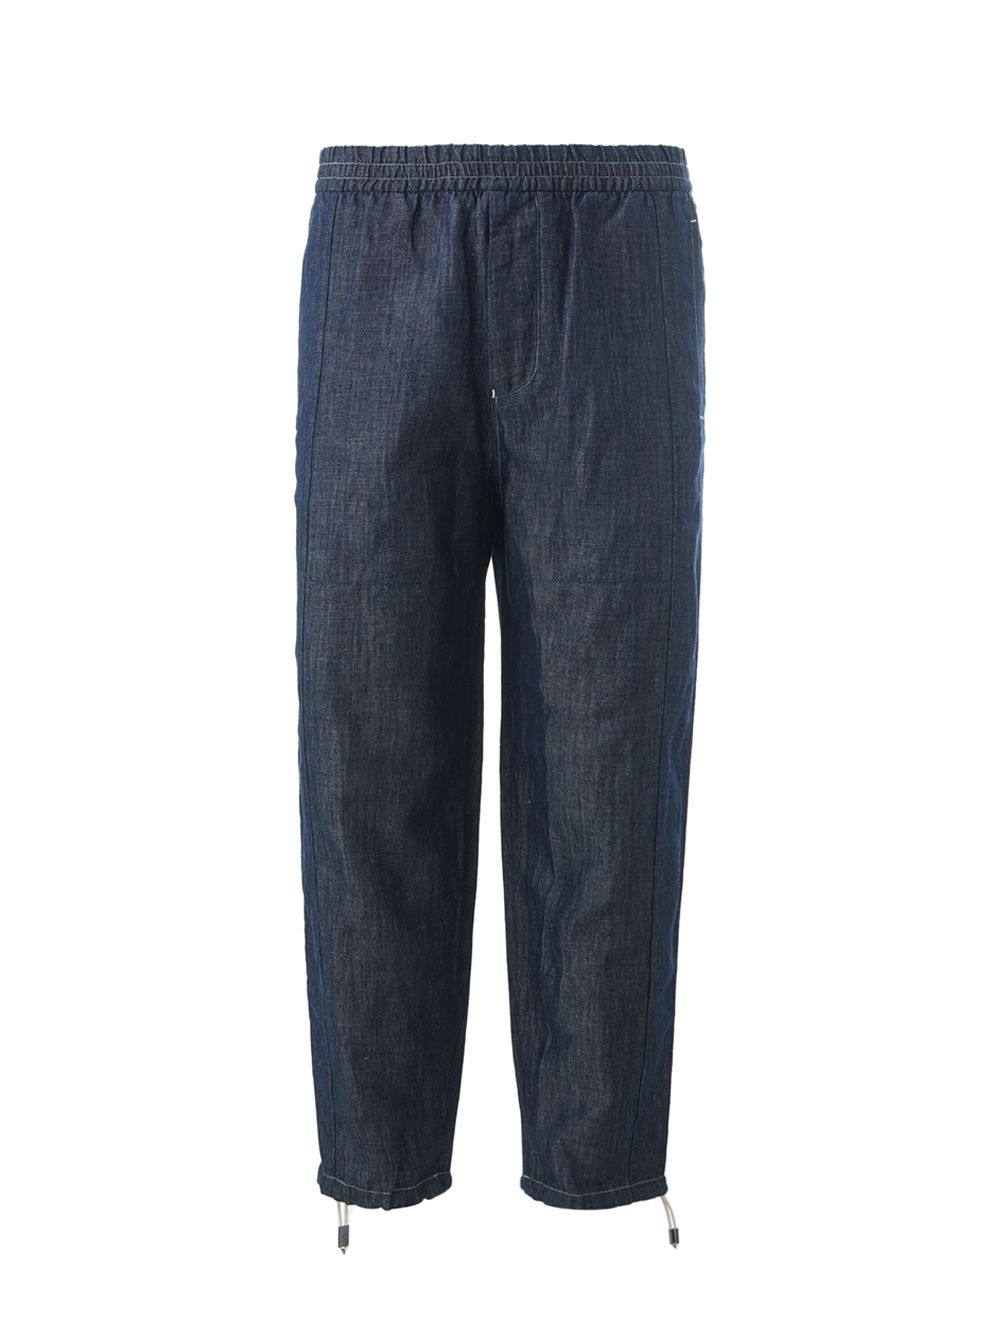 Emporio Armani Blue Trousers with Elastic Band on Waist